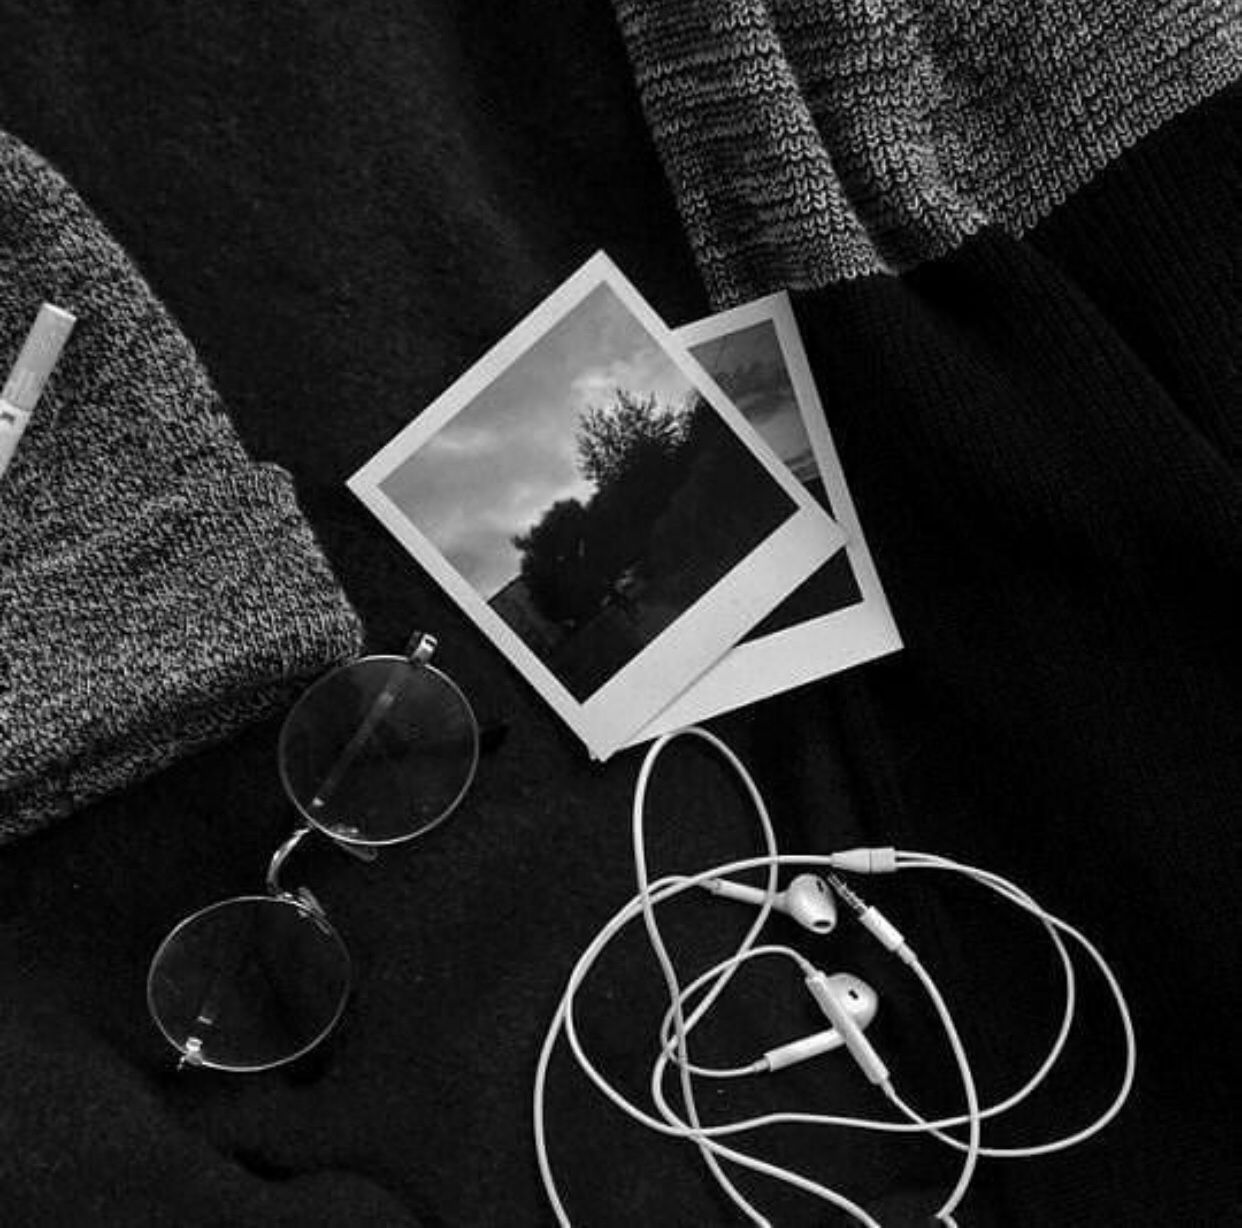 A black and white photo of an ipod, glasses earphones - Black, white, black and white